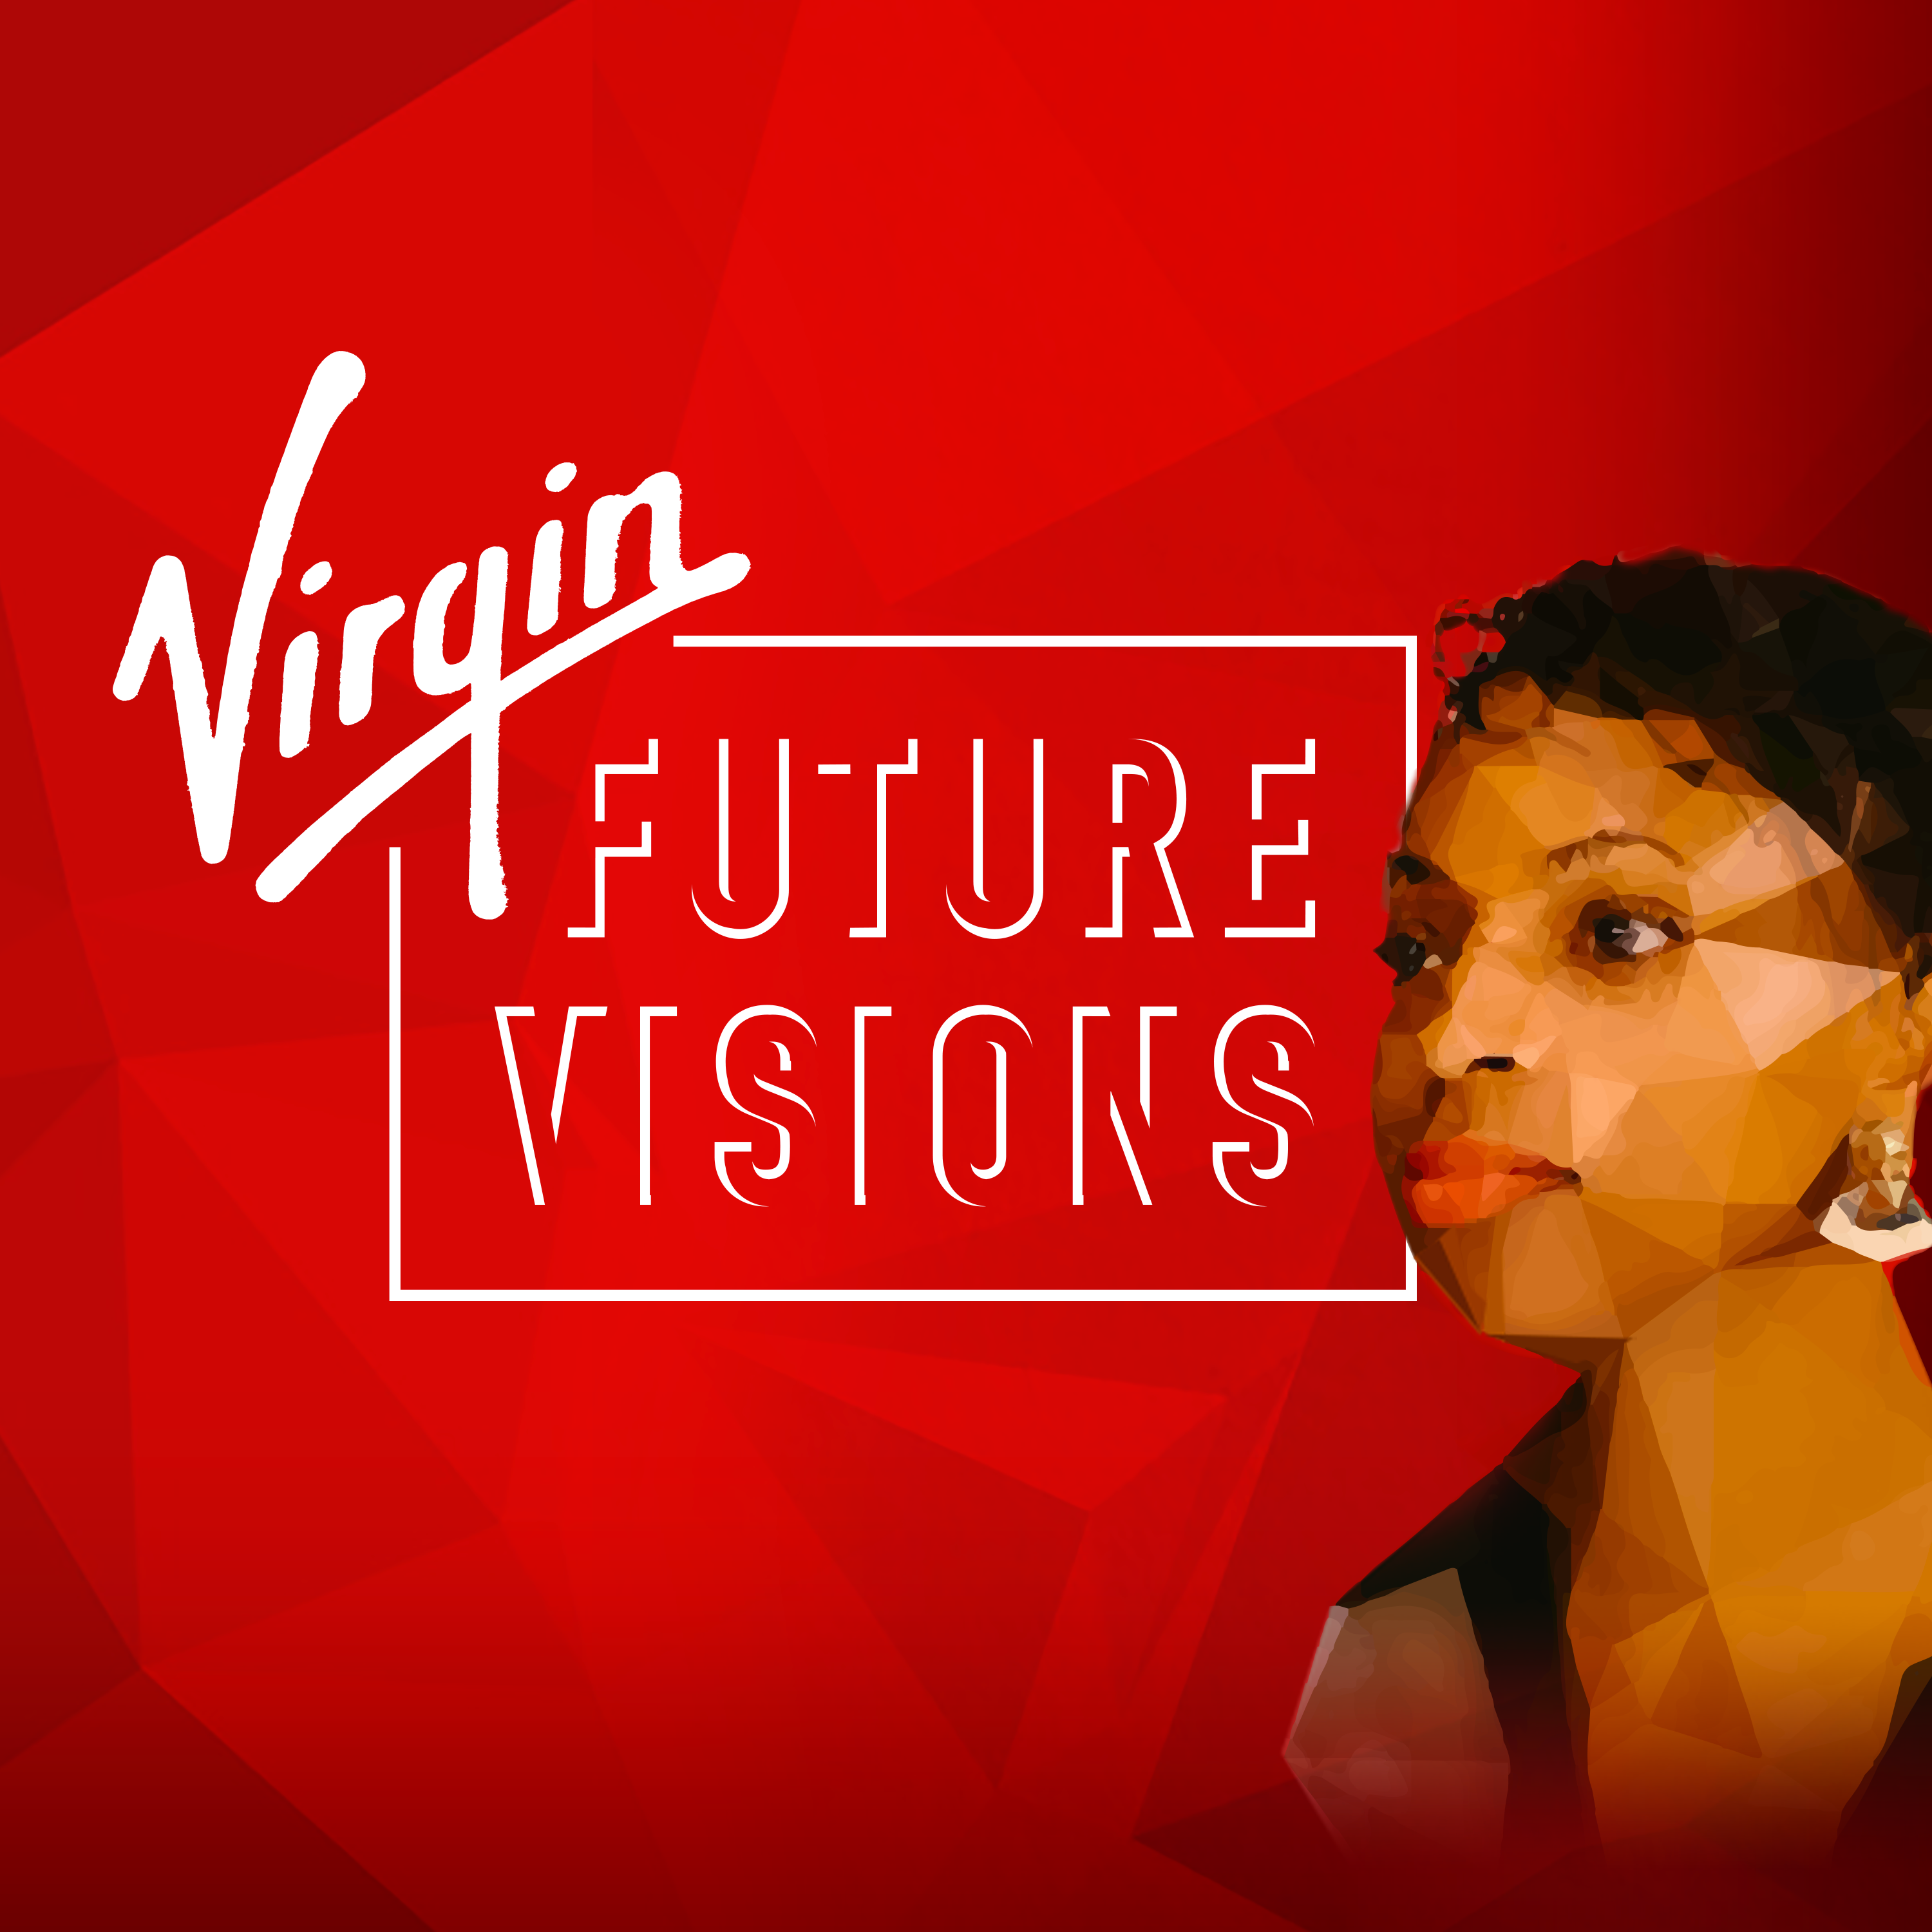 Welcome to Future Visions